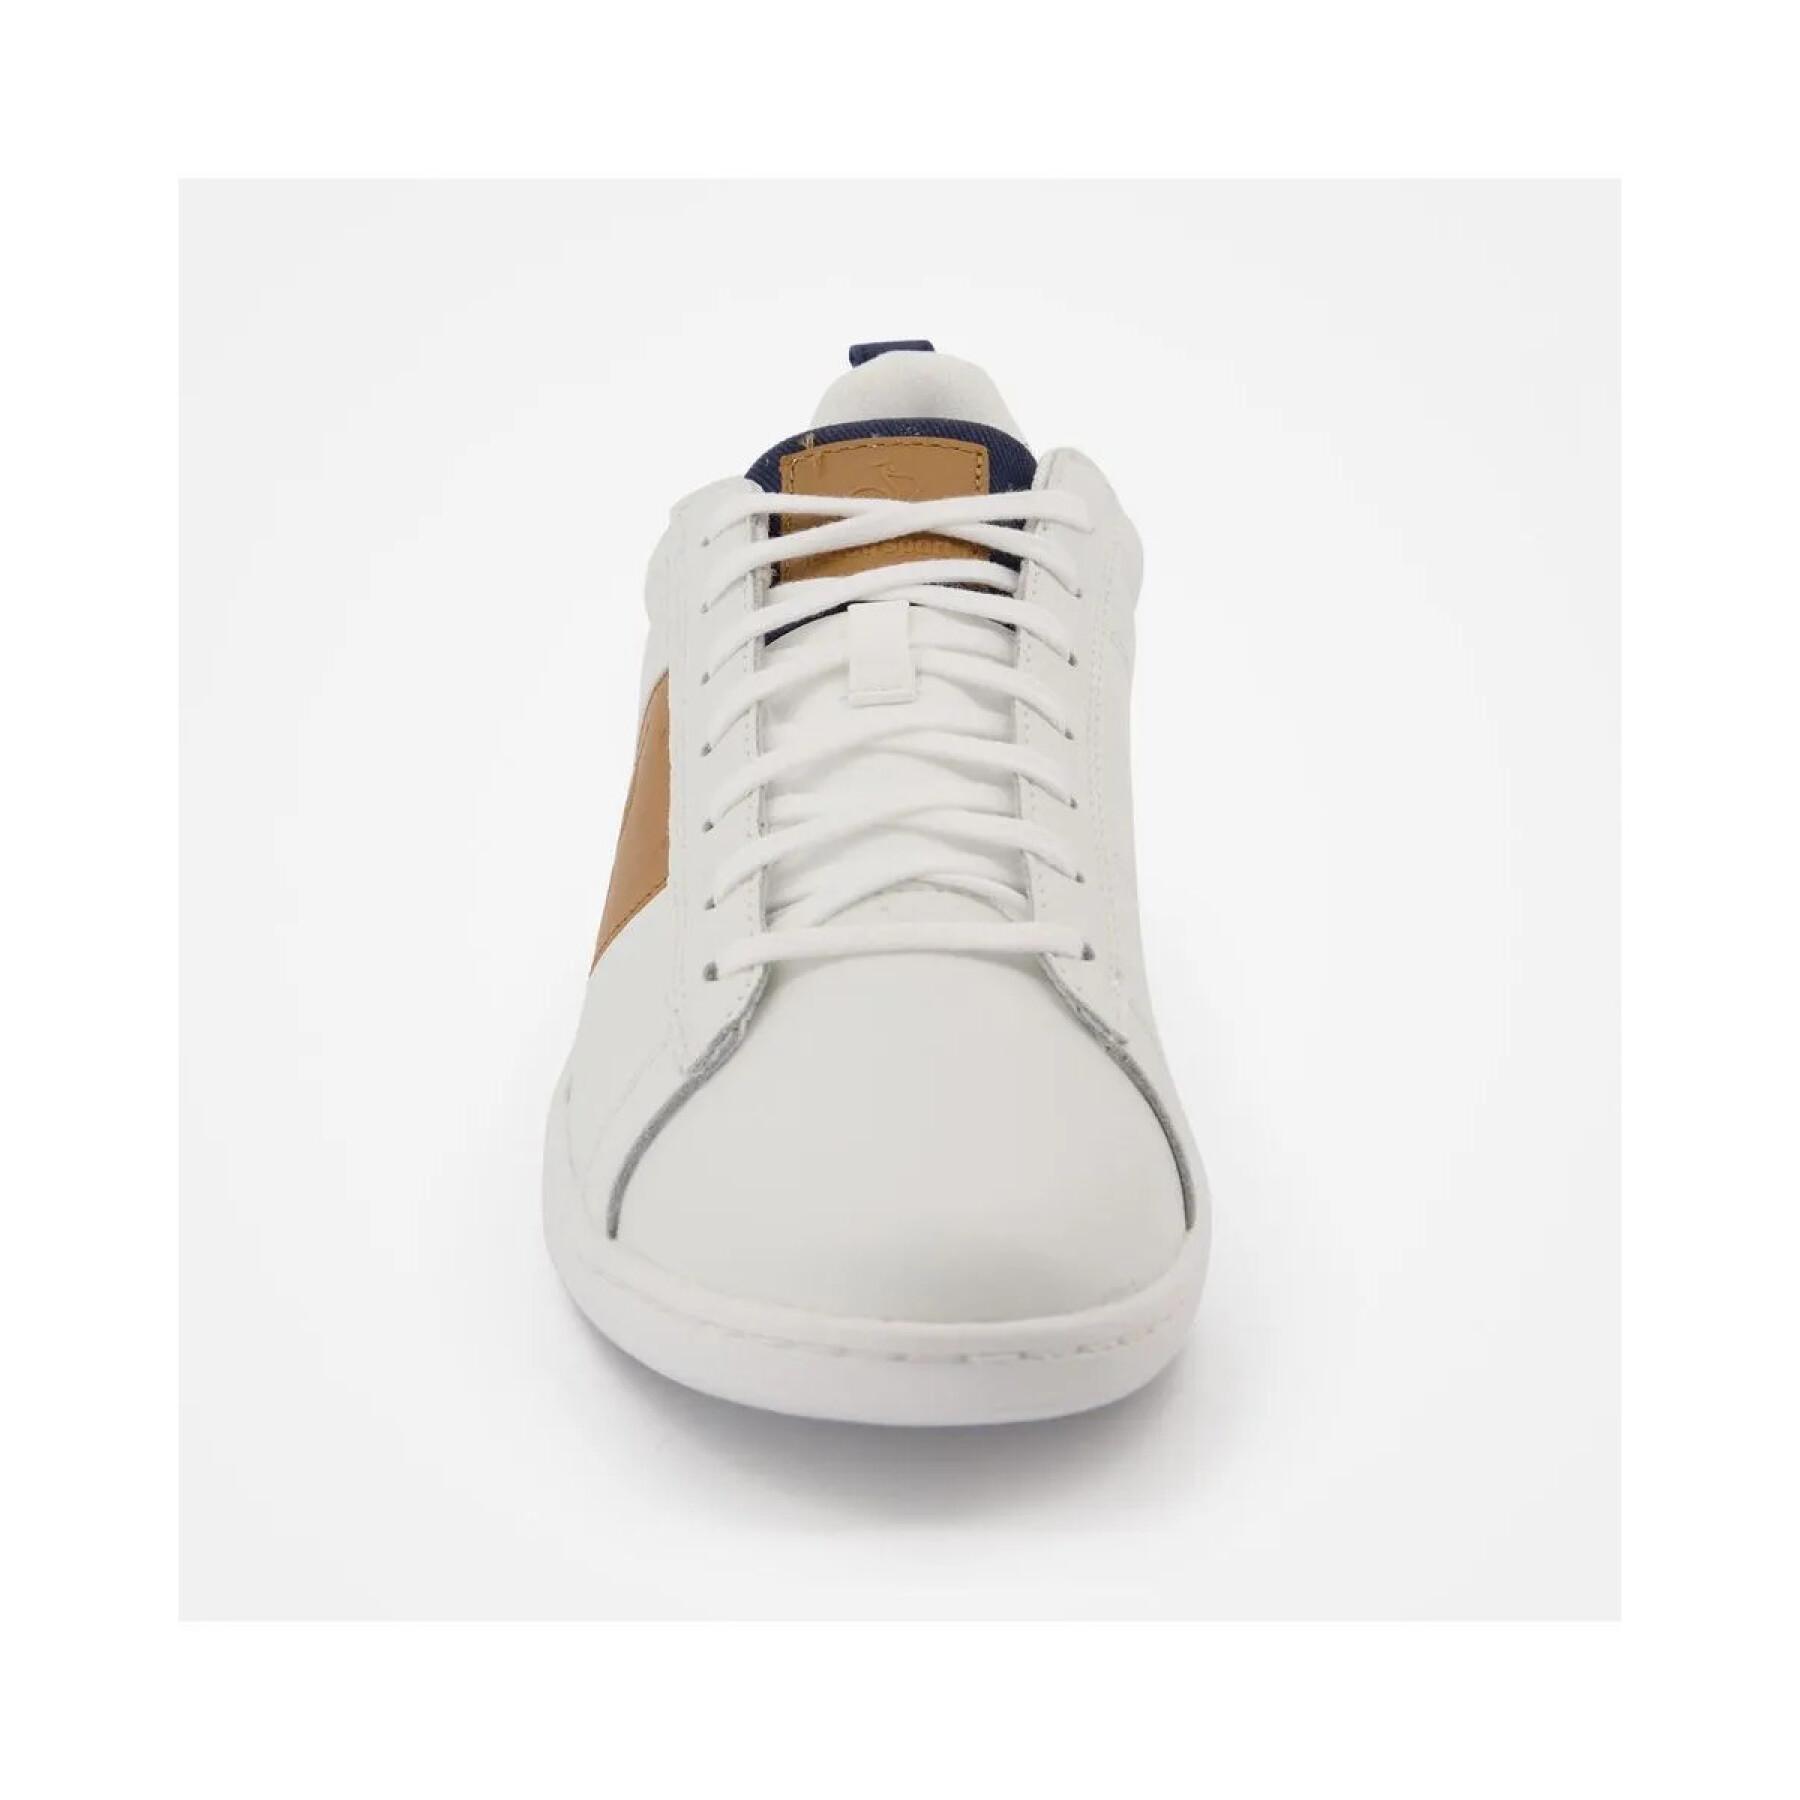 Baskets Le Coq Sportif Courtclassic Twill PS